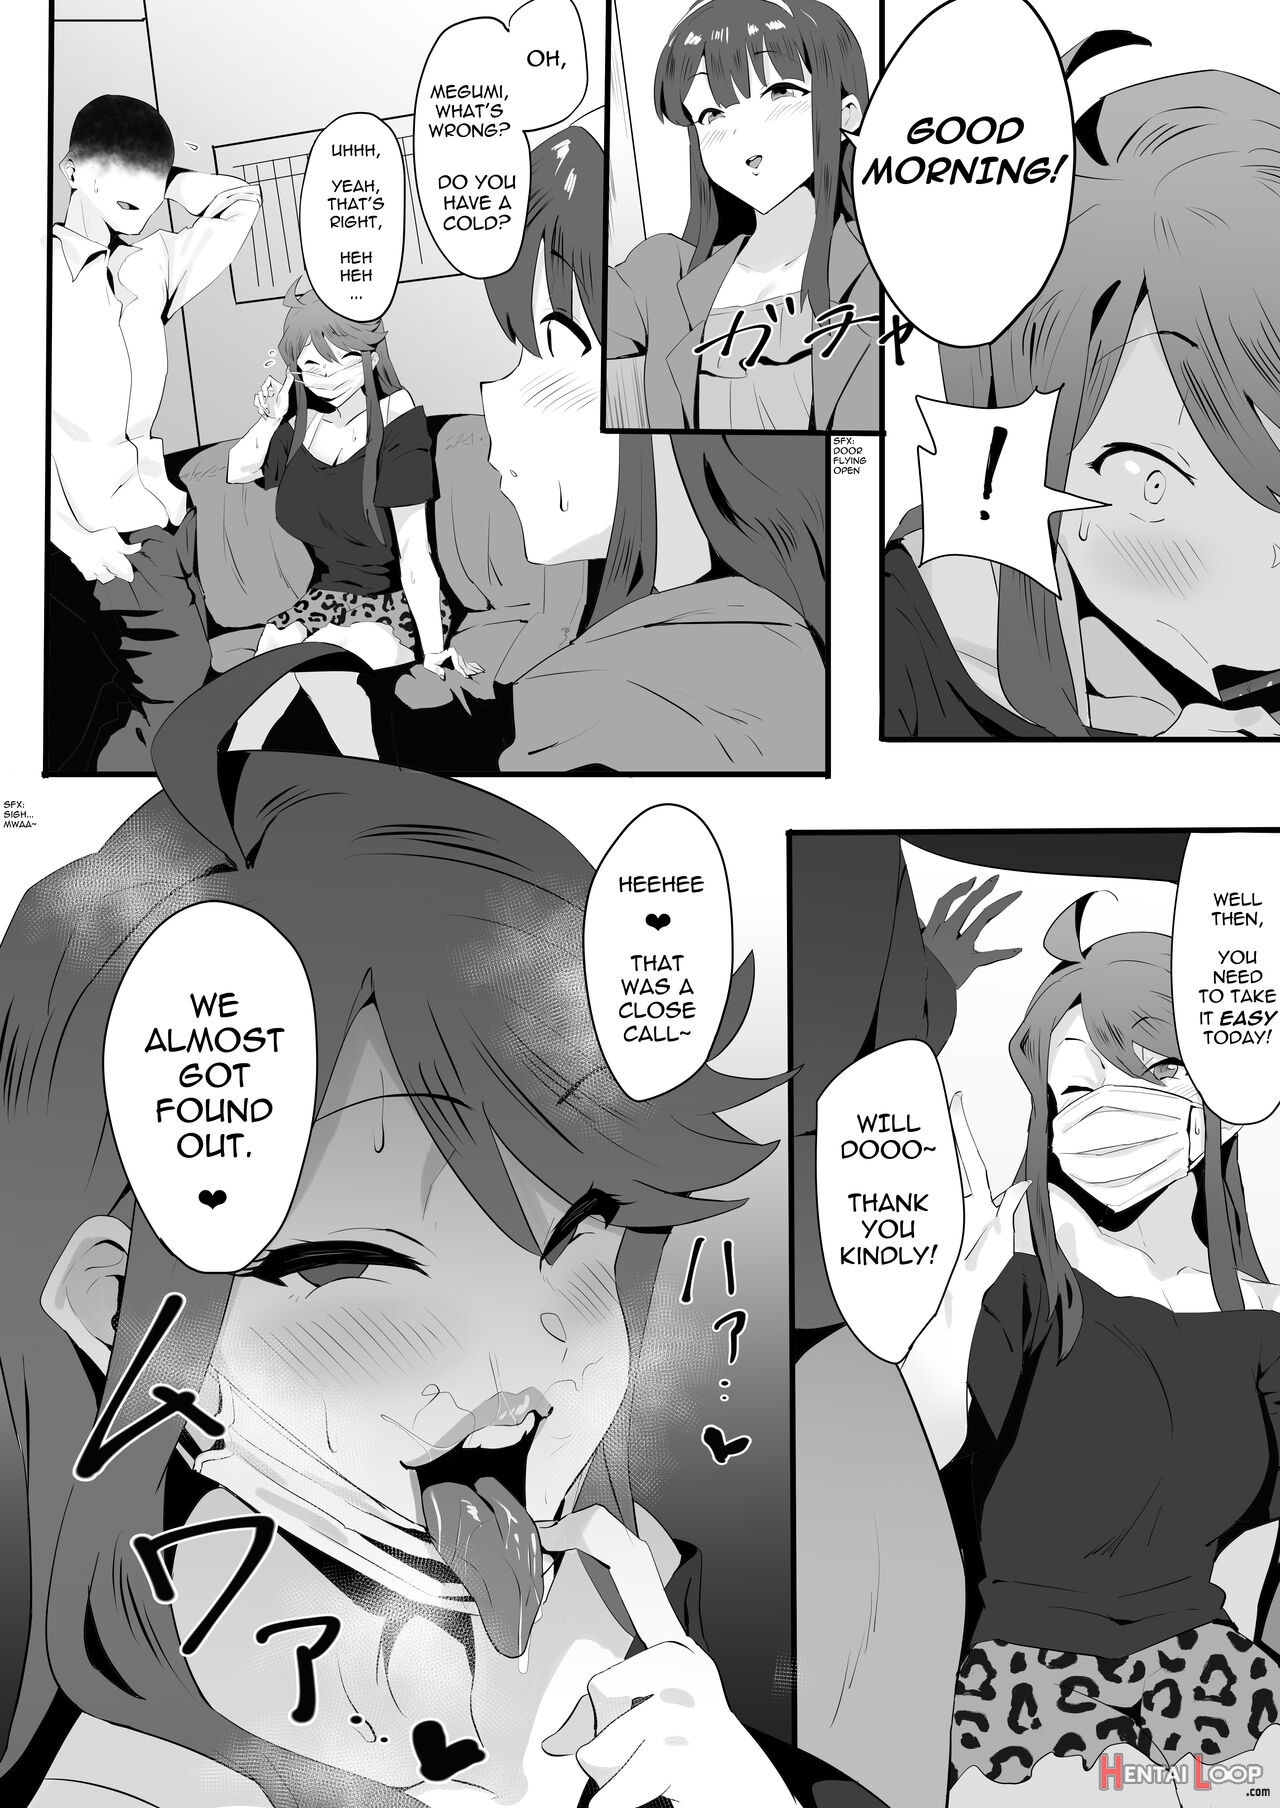 Head-to-head Blowjob Battle With A Gal Idol page 7